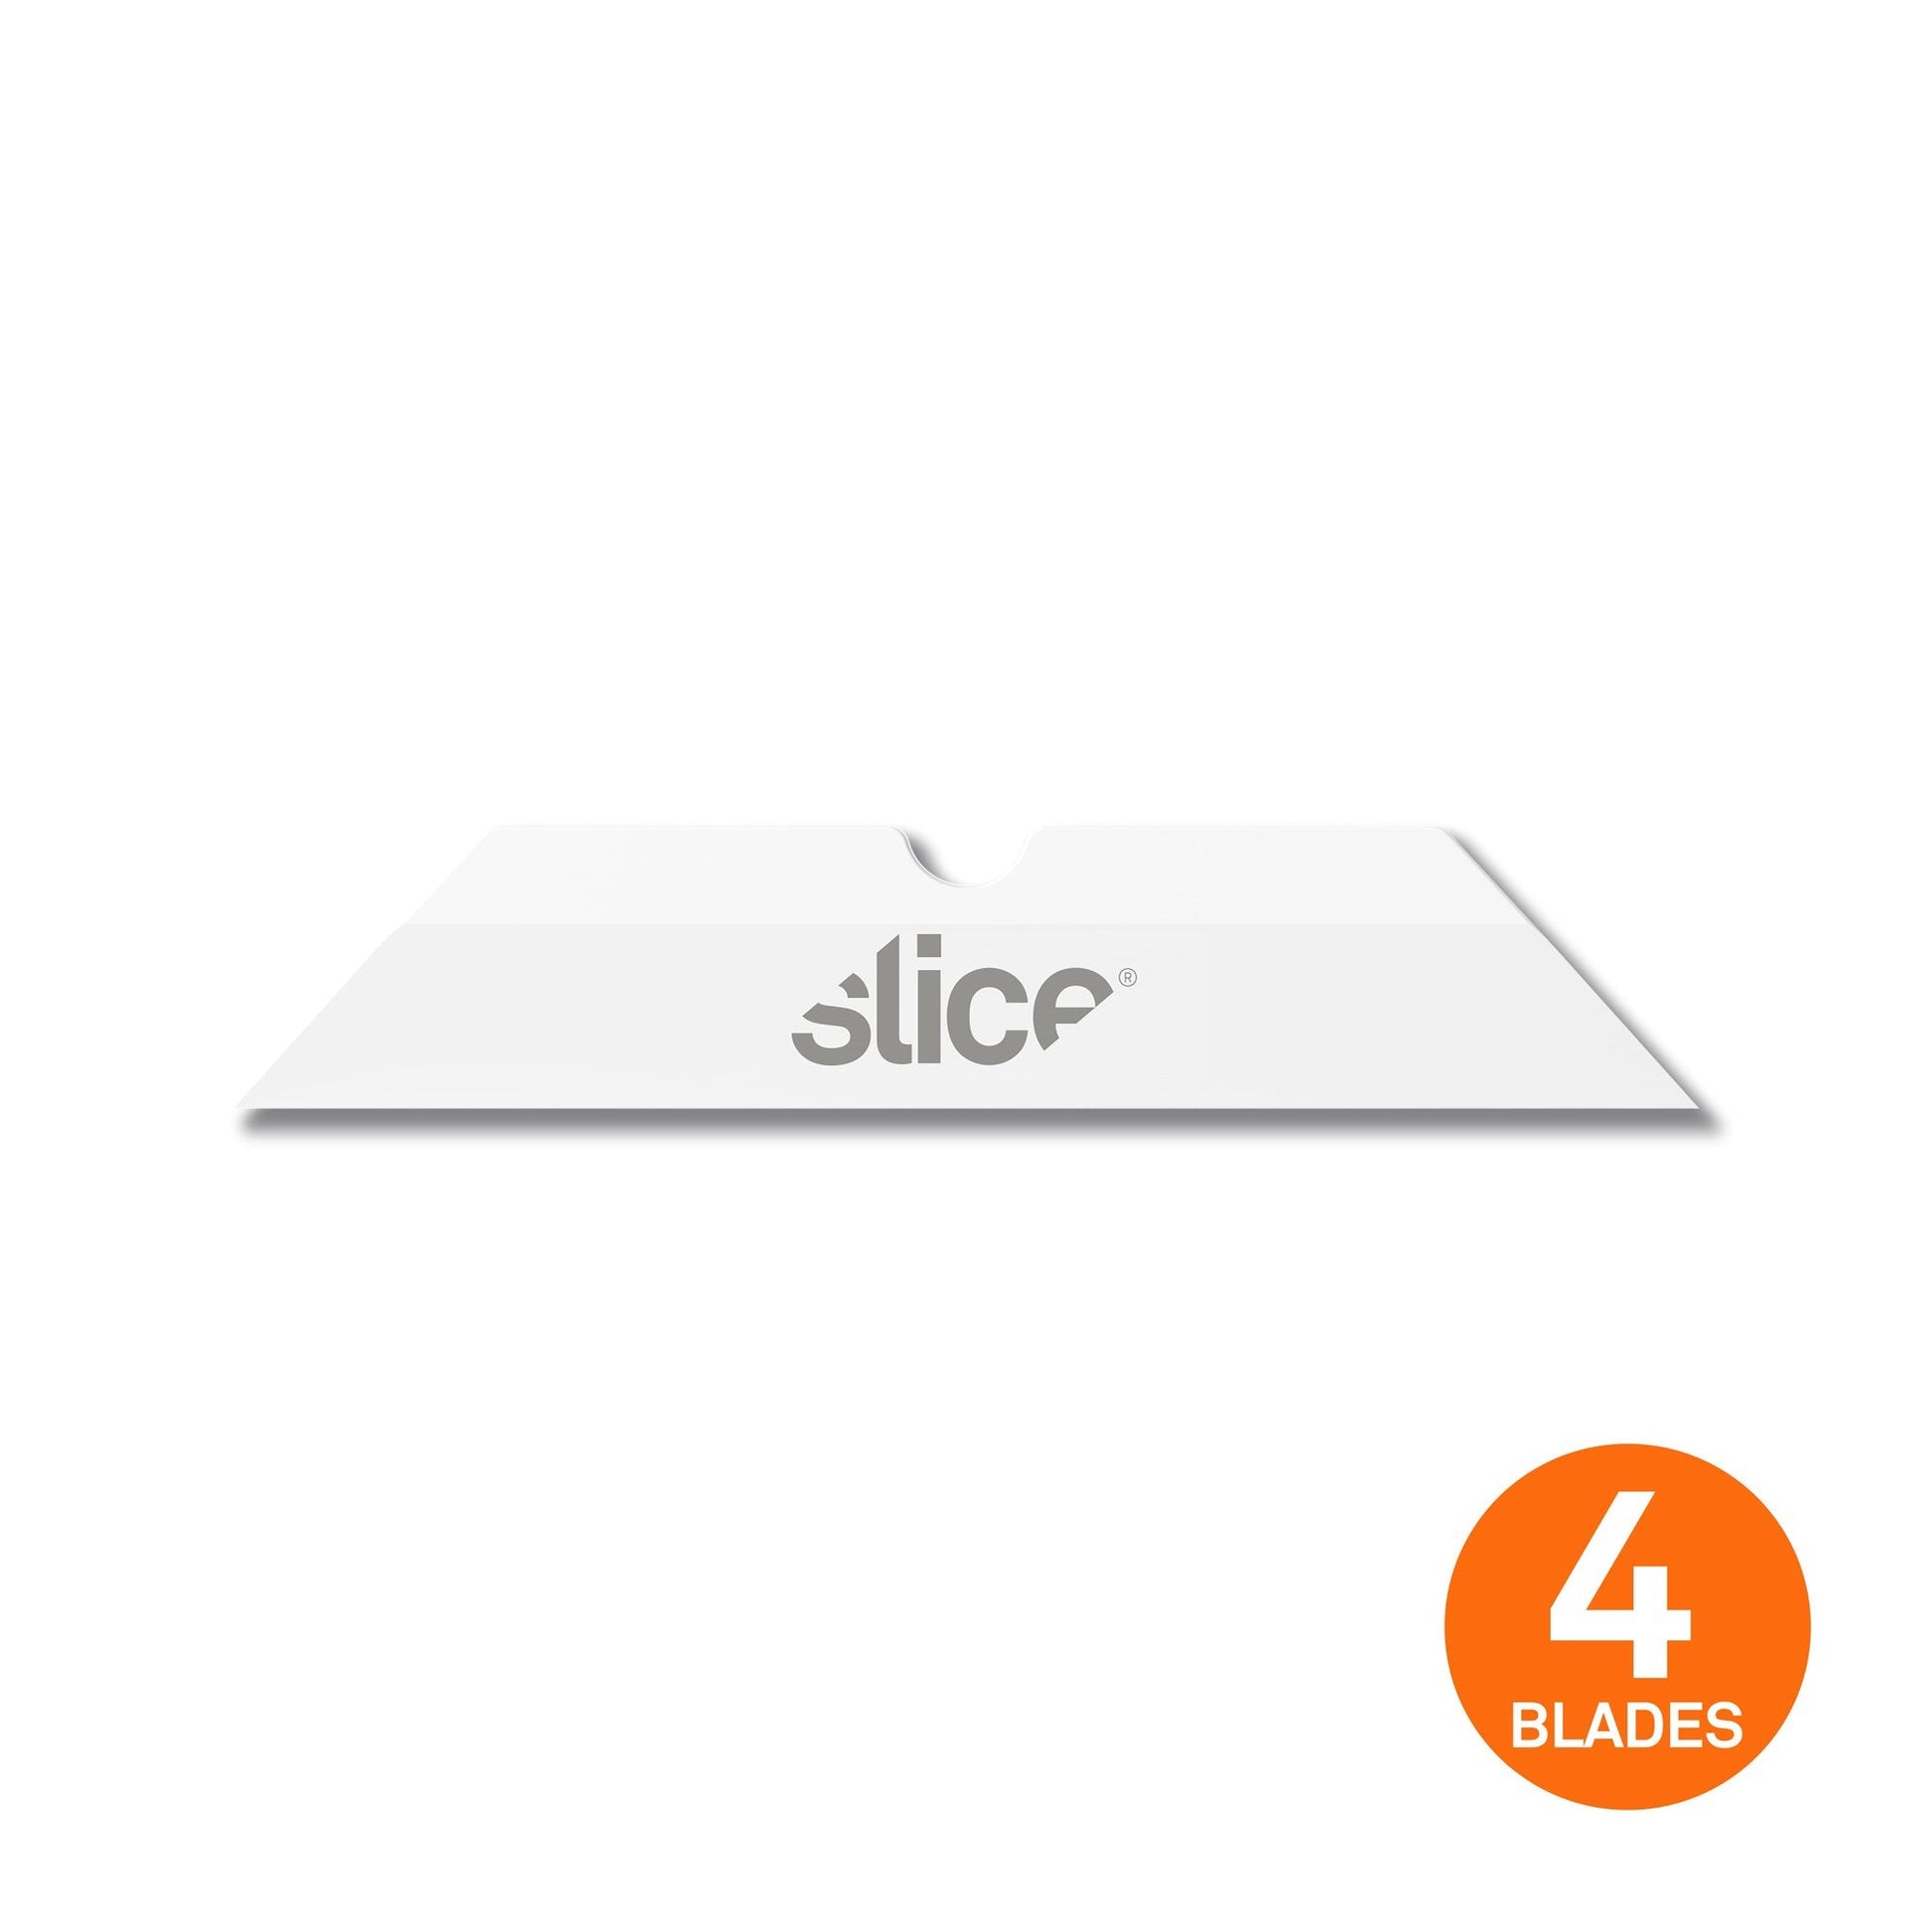 The Slice 10408 Box Cutter Blade with pointed tips